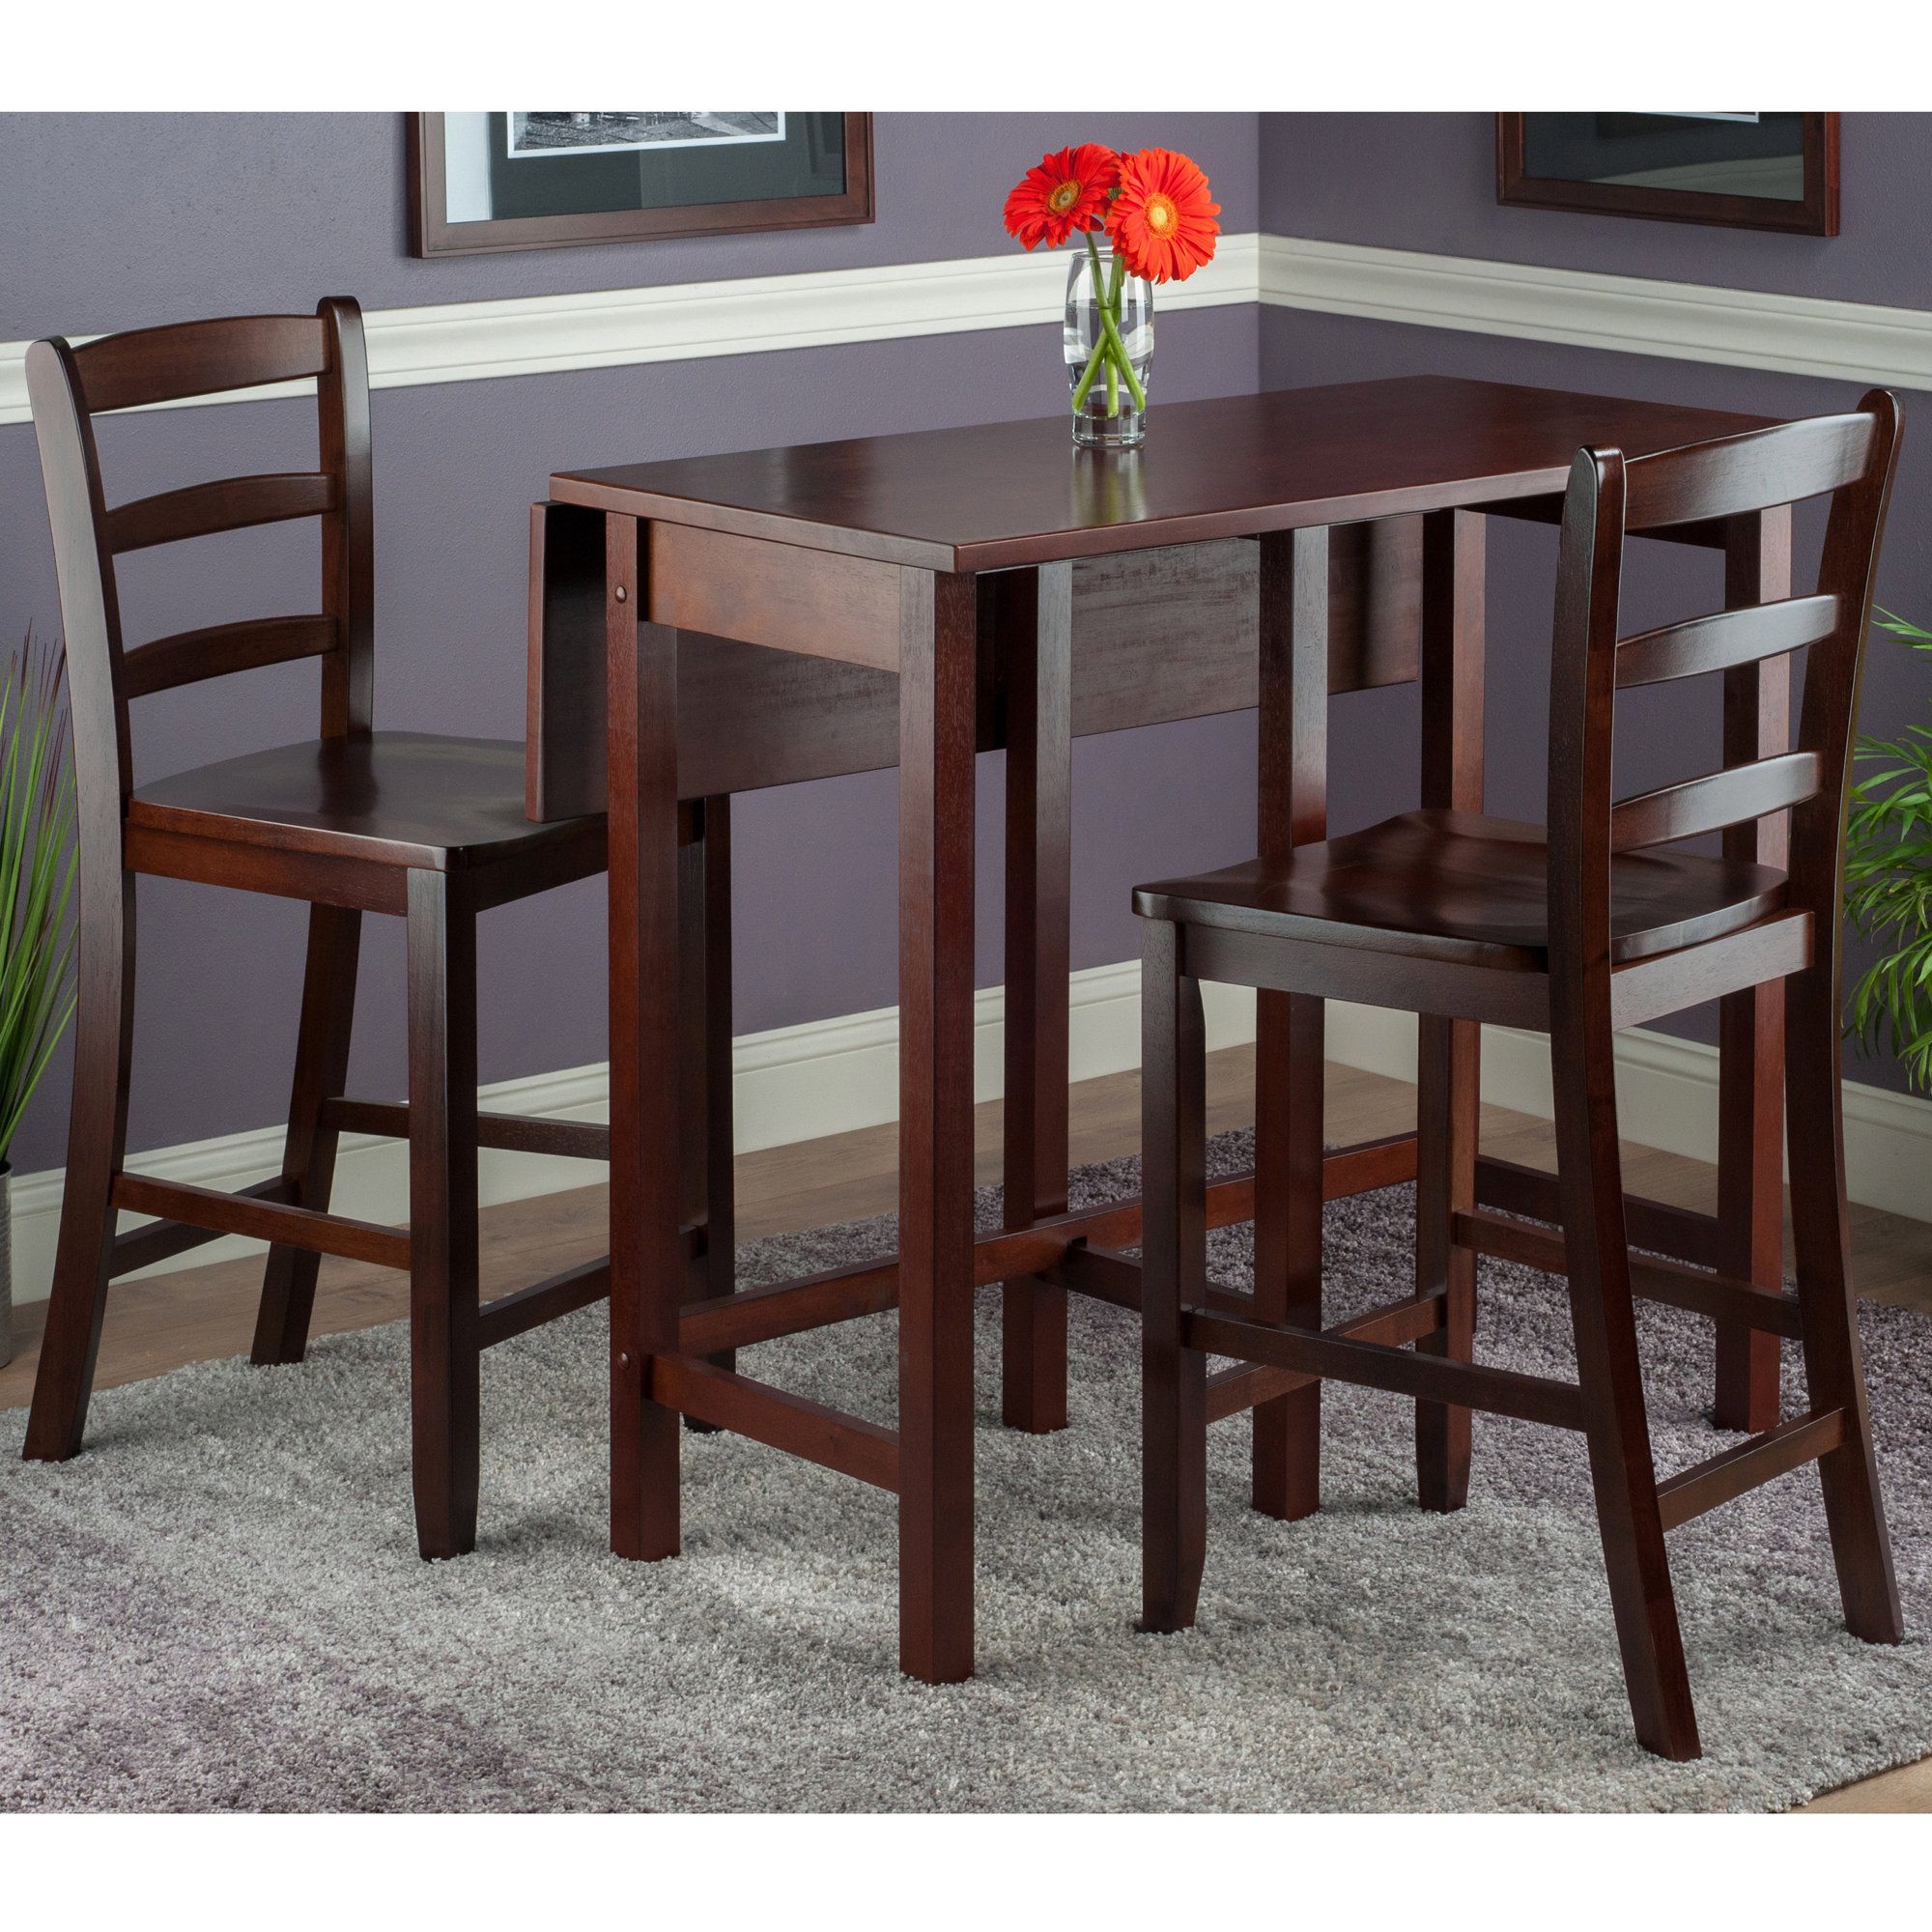 Bettencourt 3 Piece Drop Leaf Dining Set Pertaining To Most Current Bettencourt 3 Piece Counter Height Dining Sets (View 4 of 20)